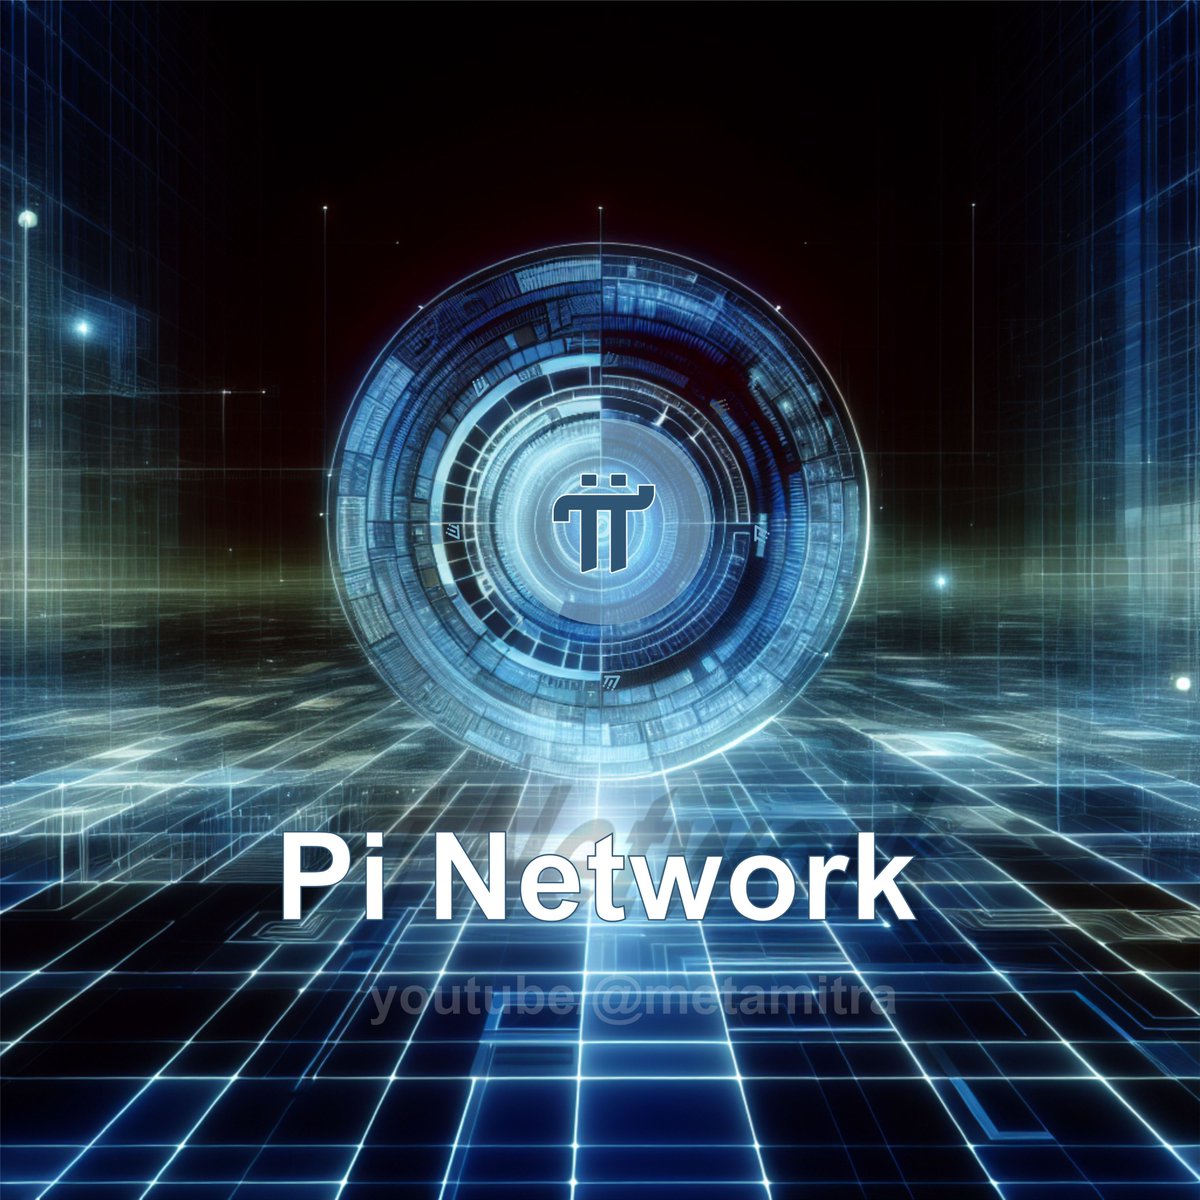 Pi Network
#pifest #pinetwork #pinetworknewupdate #pinetworkupdate #pinetworkindia #PiCommerce 
#pinetworkupdates #pinetworknews #pinetworkupdate #pinetworkkyc #pinetworknewupdate #picoinprice #picoinprice #PicoinTrader #pinetworkeducation #piinformation